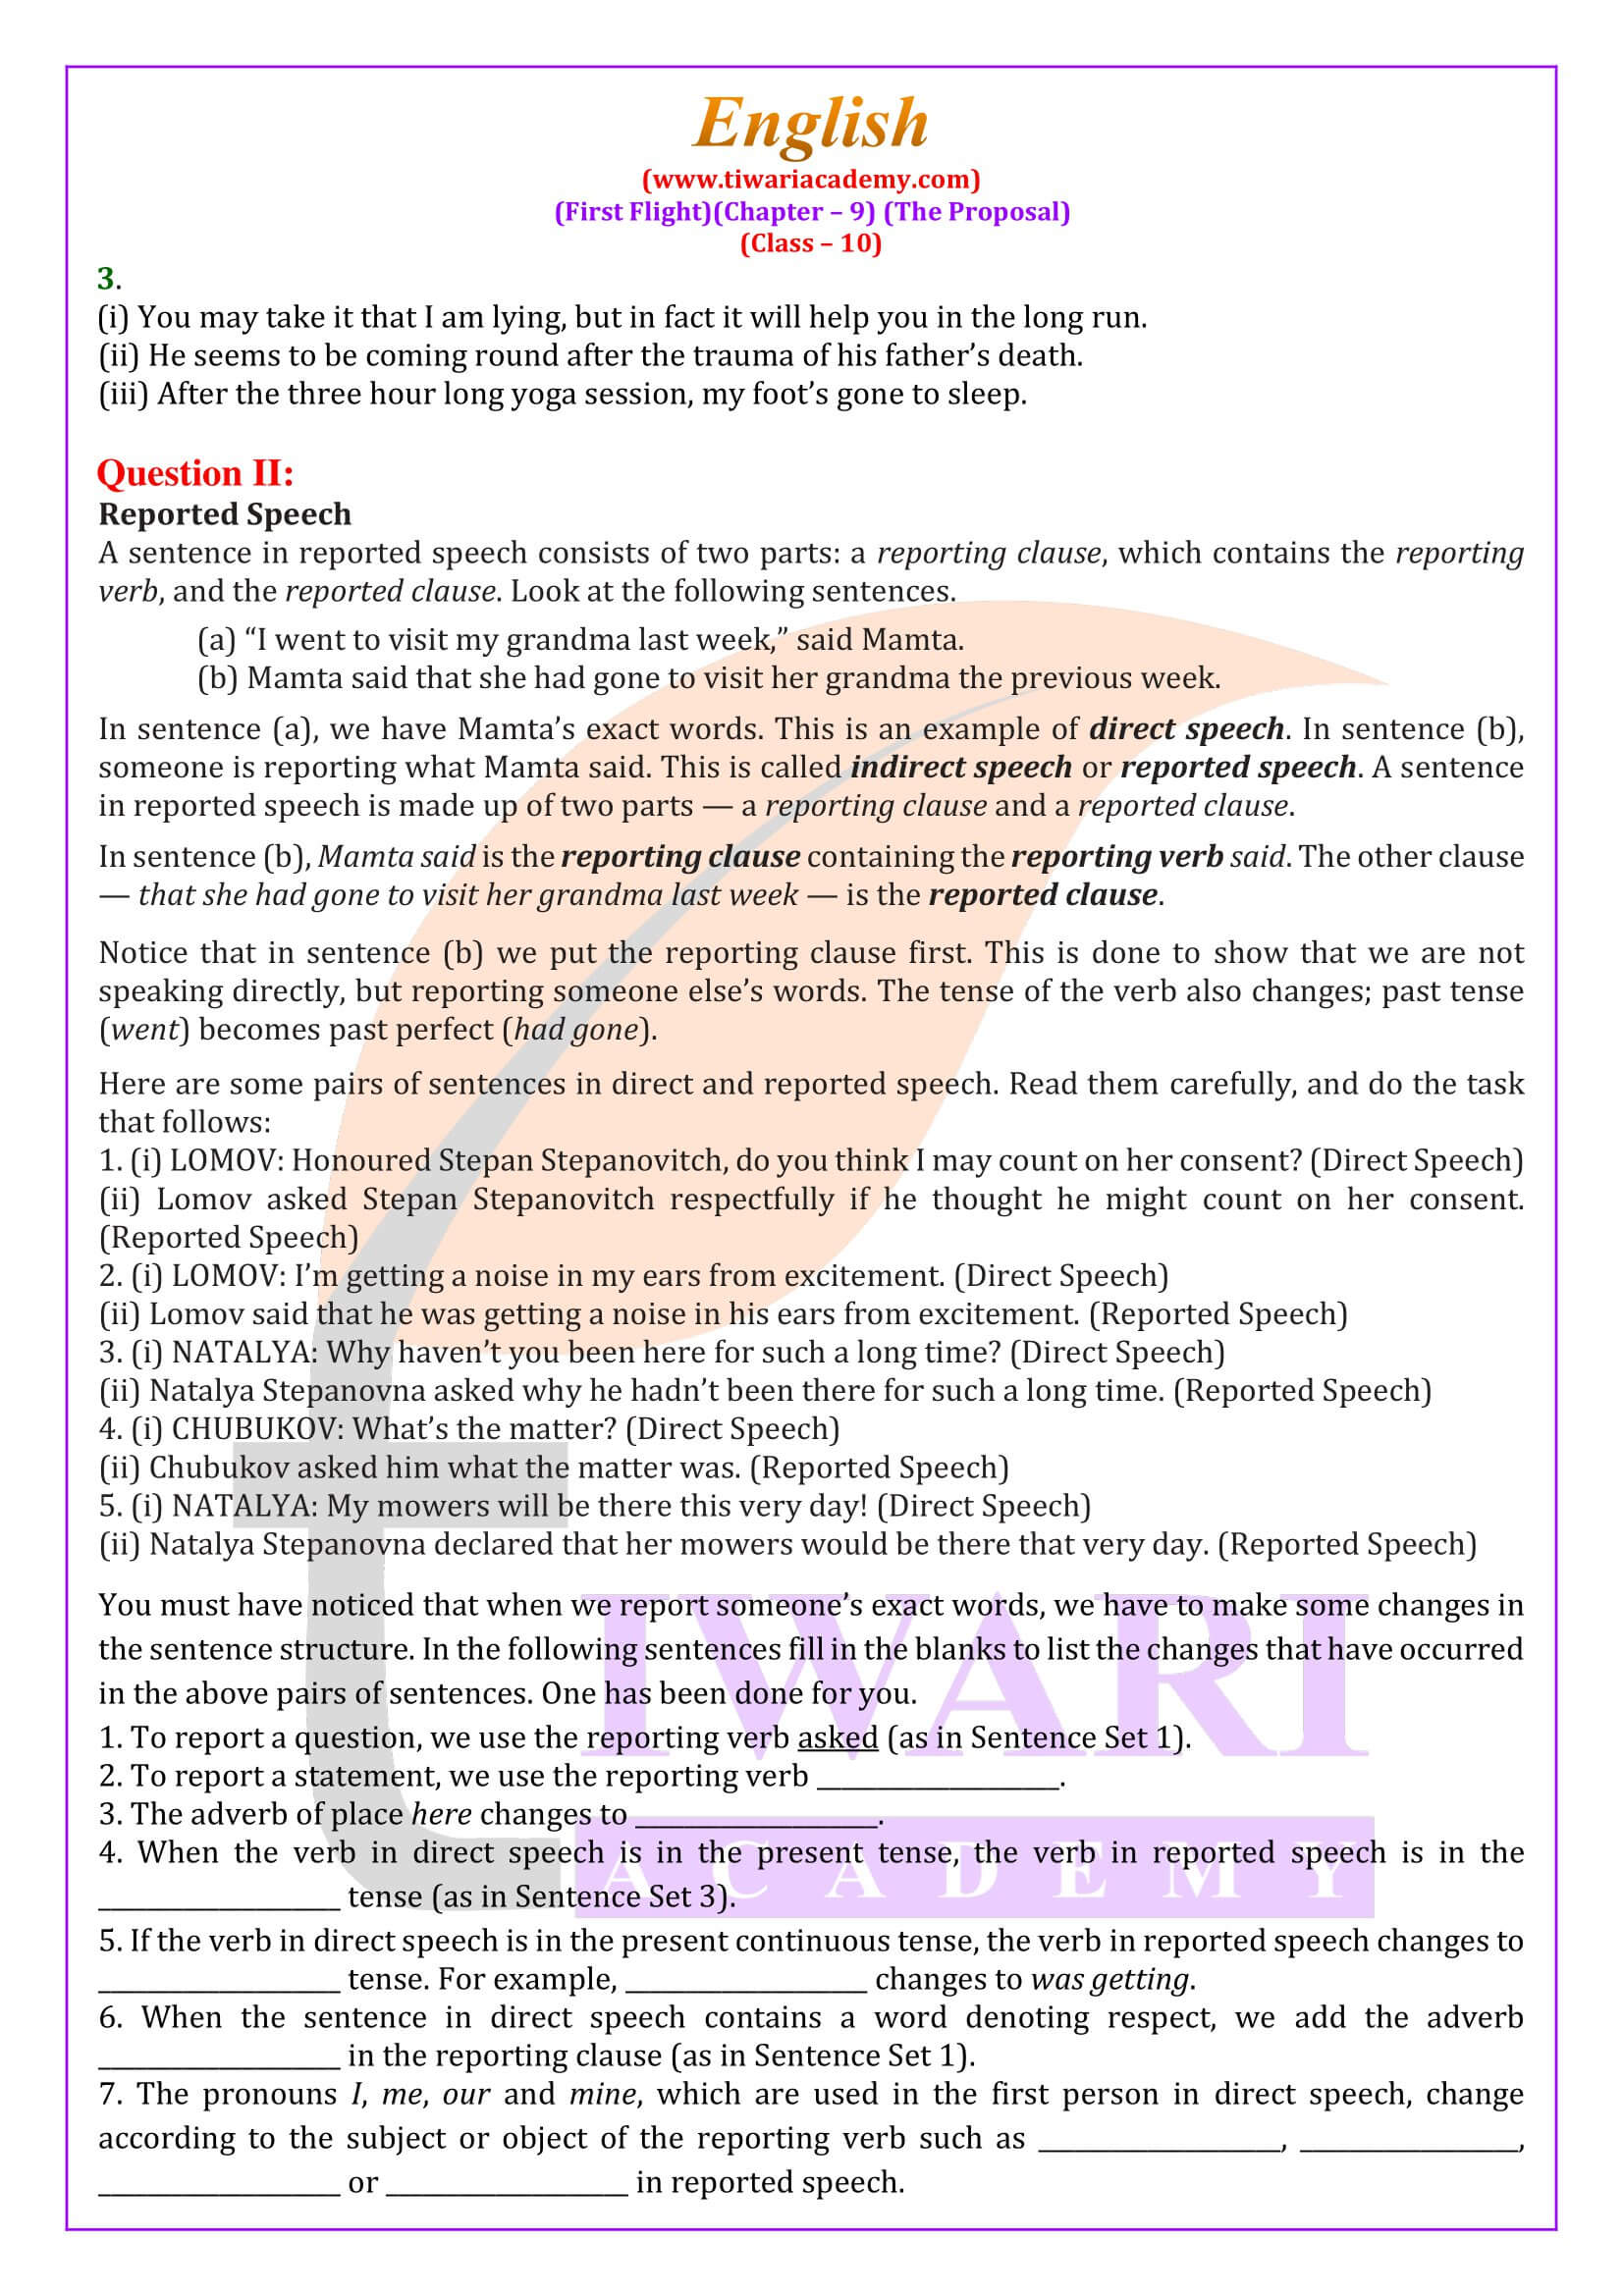 NCERT Solutions for Class 10 English Chapter 9 The Proposal